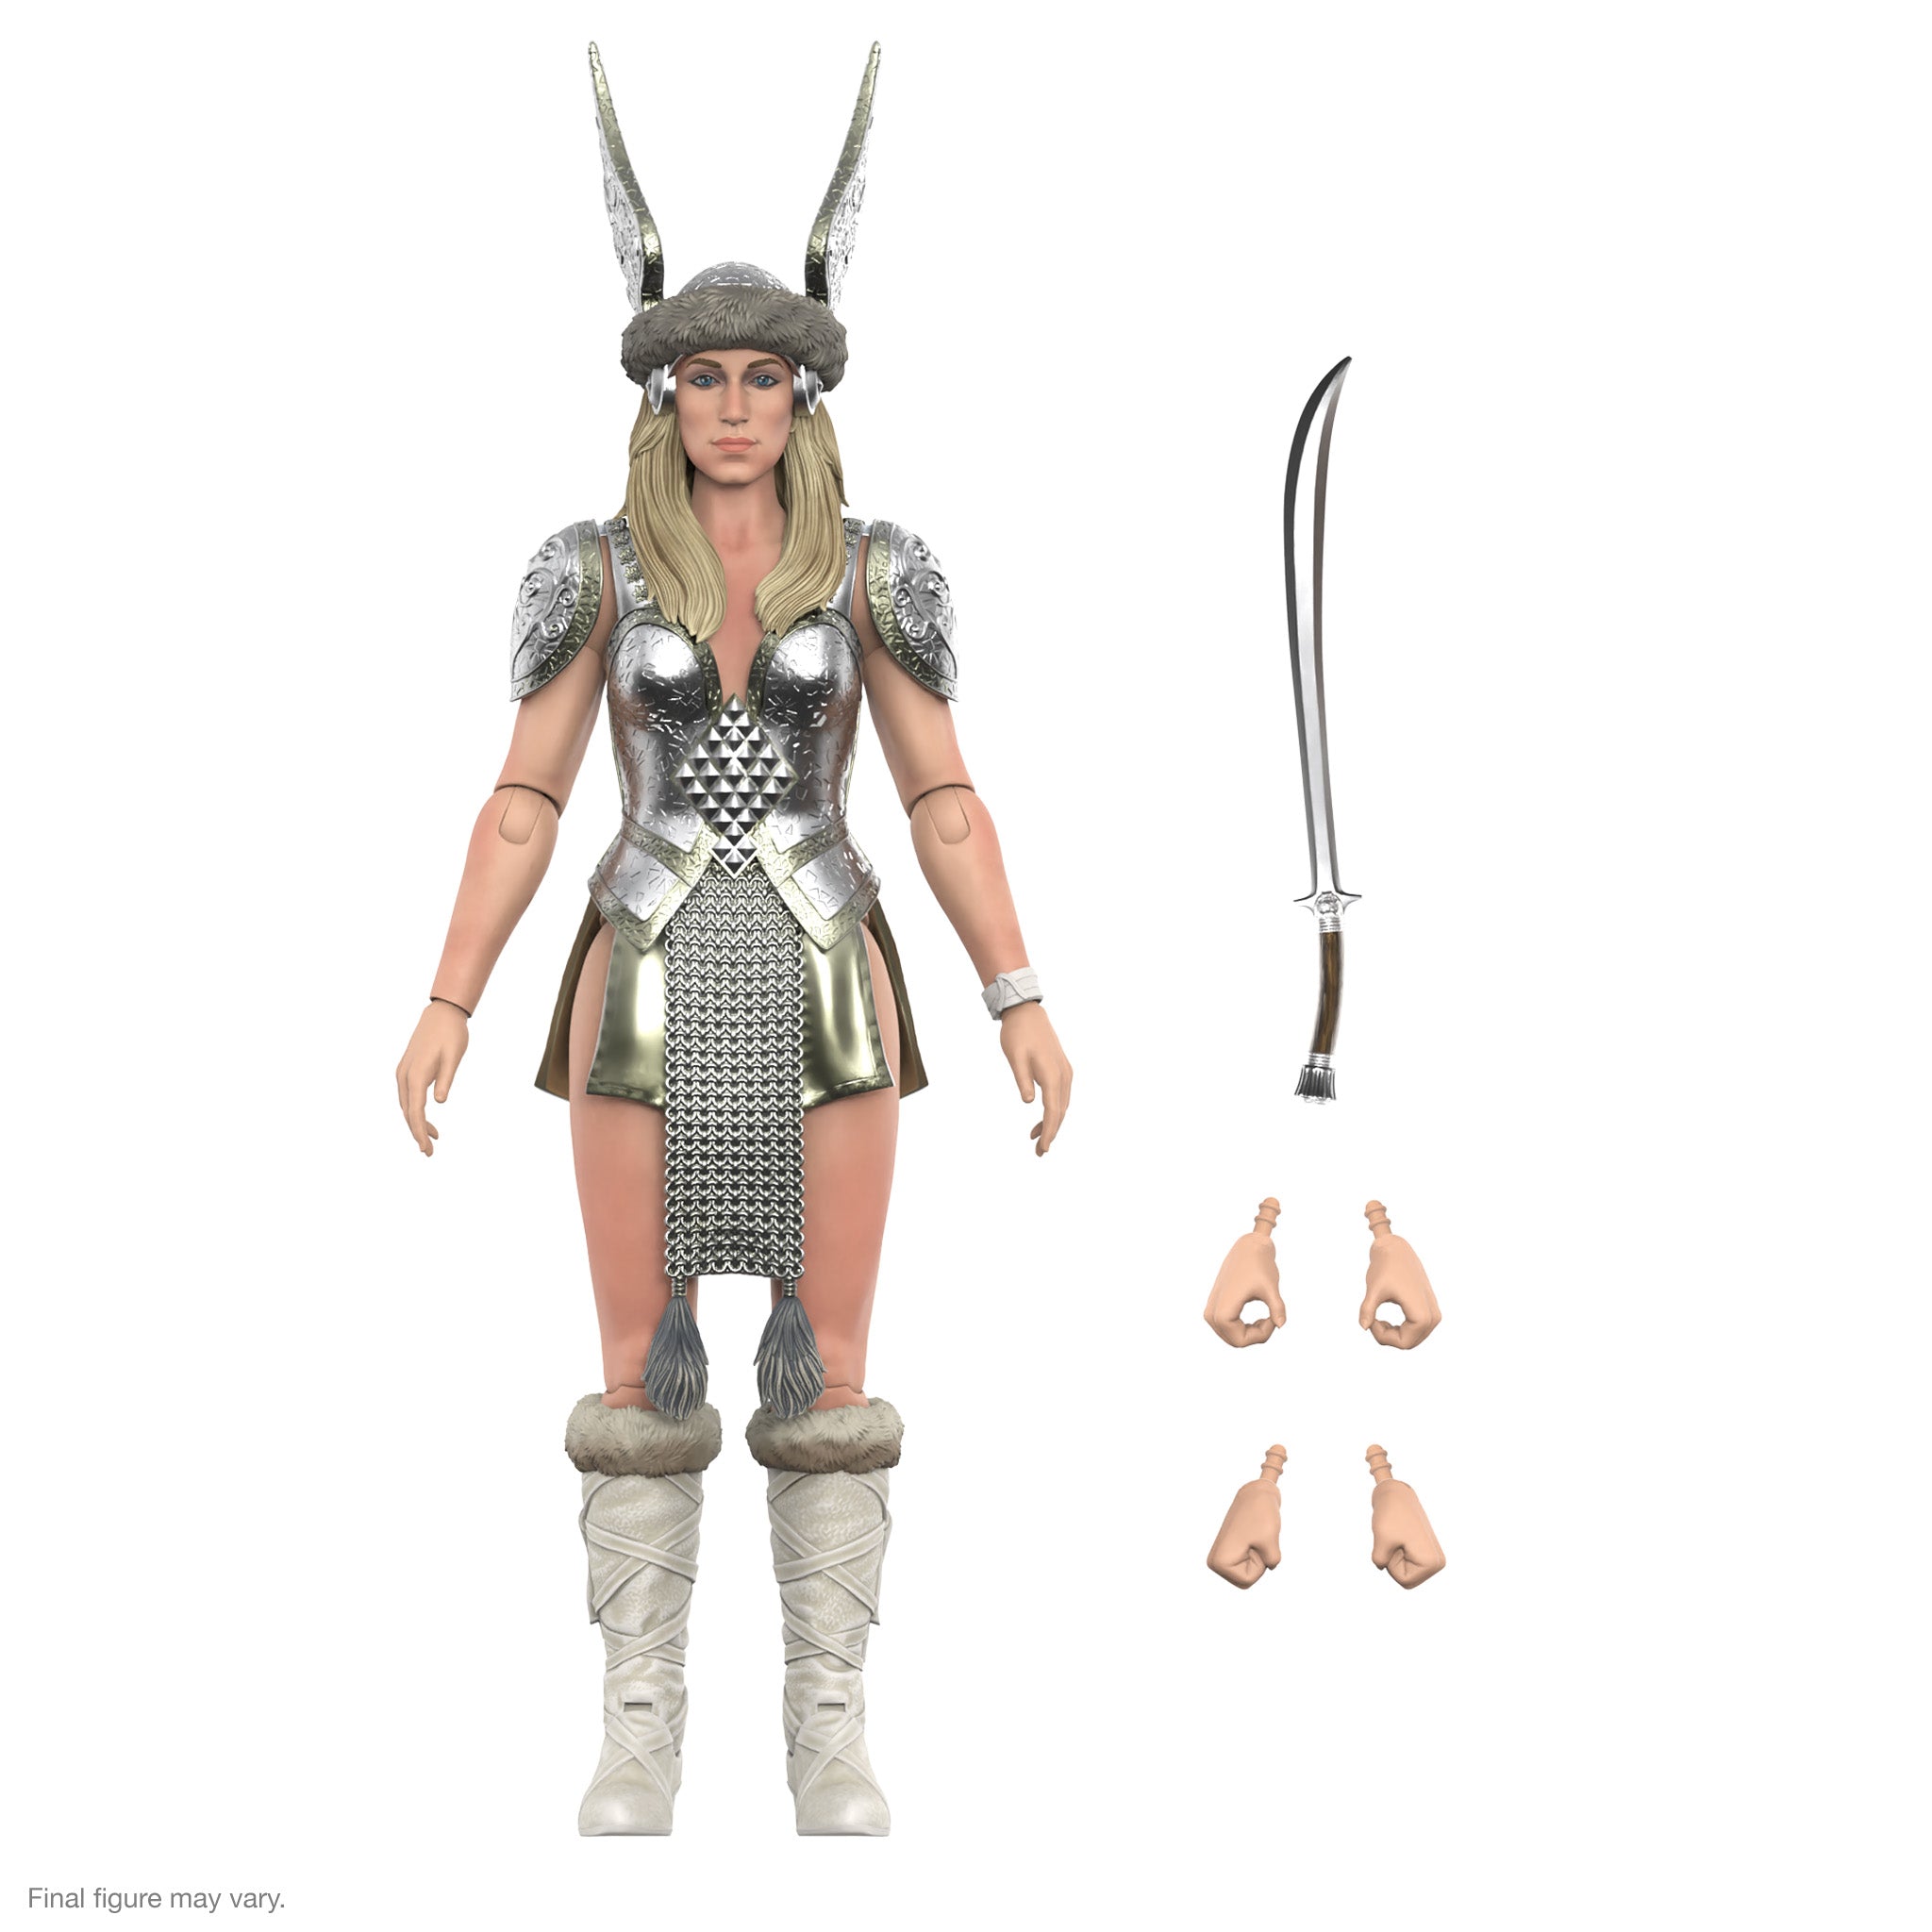 Conan the Barbarian ULTIMATES! Wave 5 - Valeria Spirit (Battle of the Mounds)